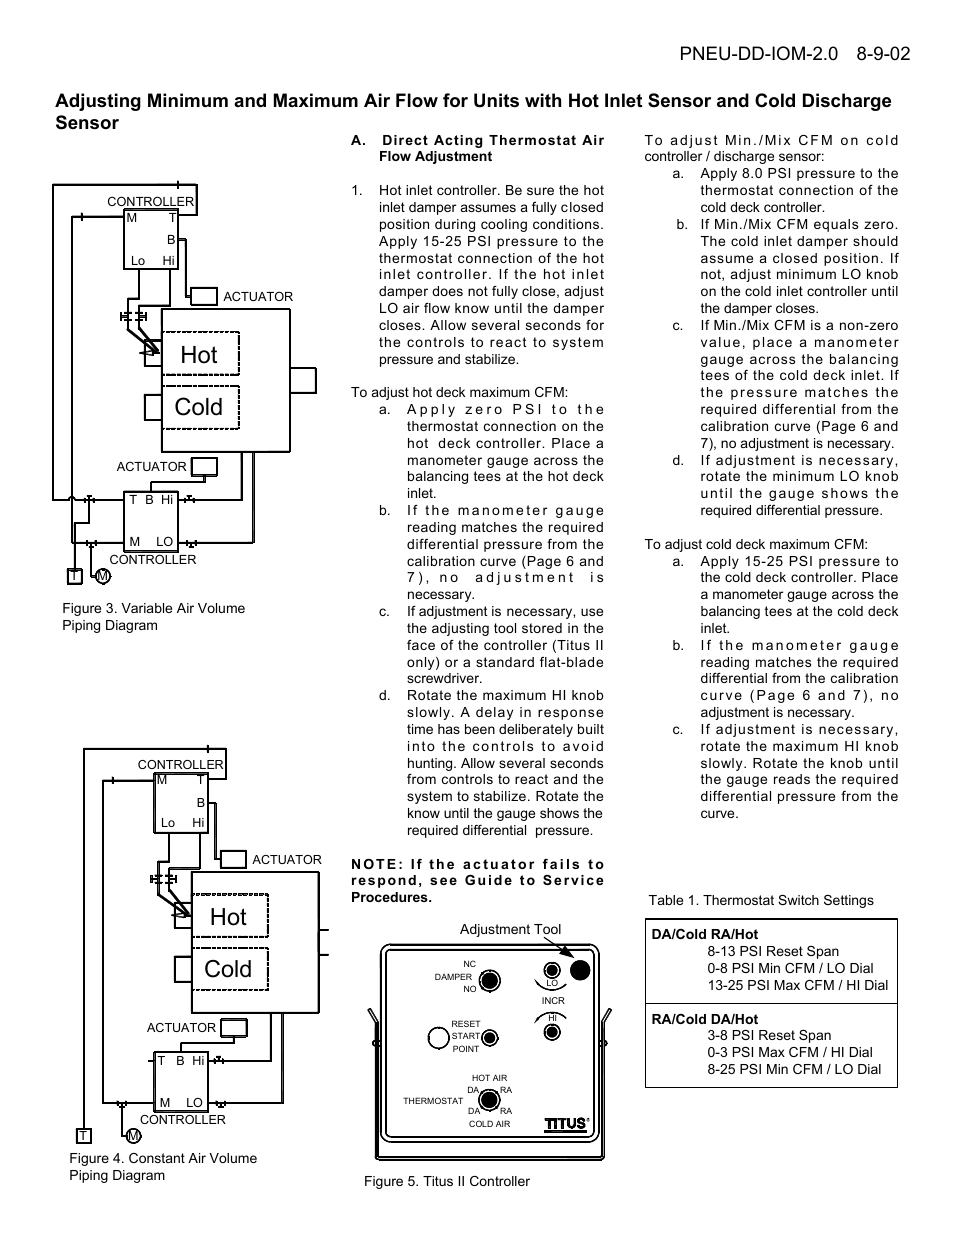 Hot cold | Titus Pneumatic Controls for Dual Duct Terminals IOM User Manual  | Page 2 / 9 | Original mode